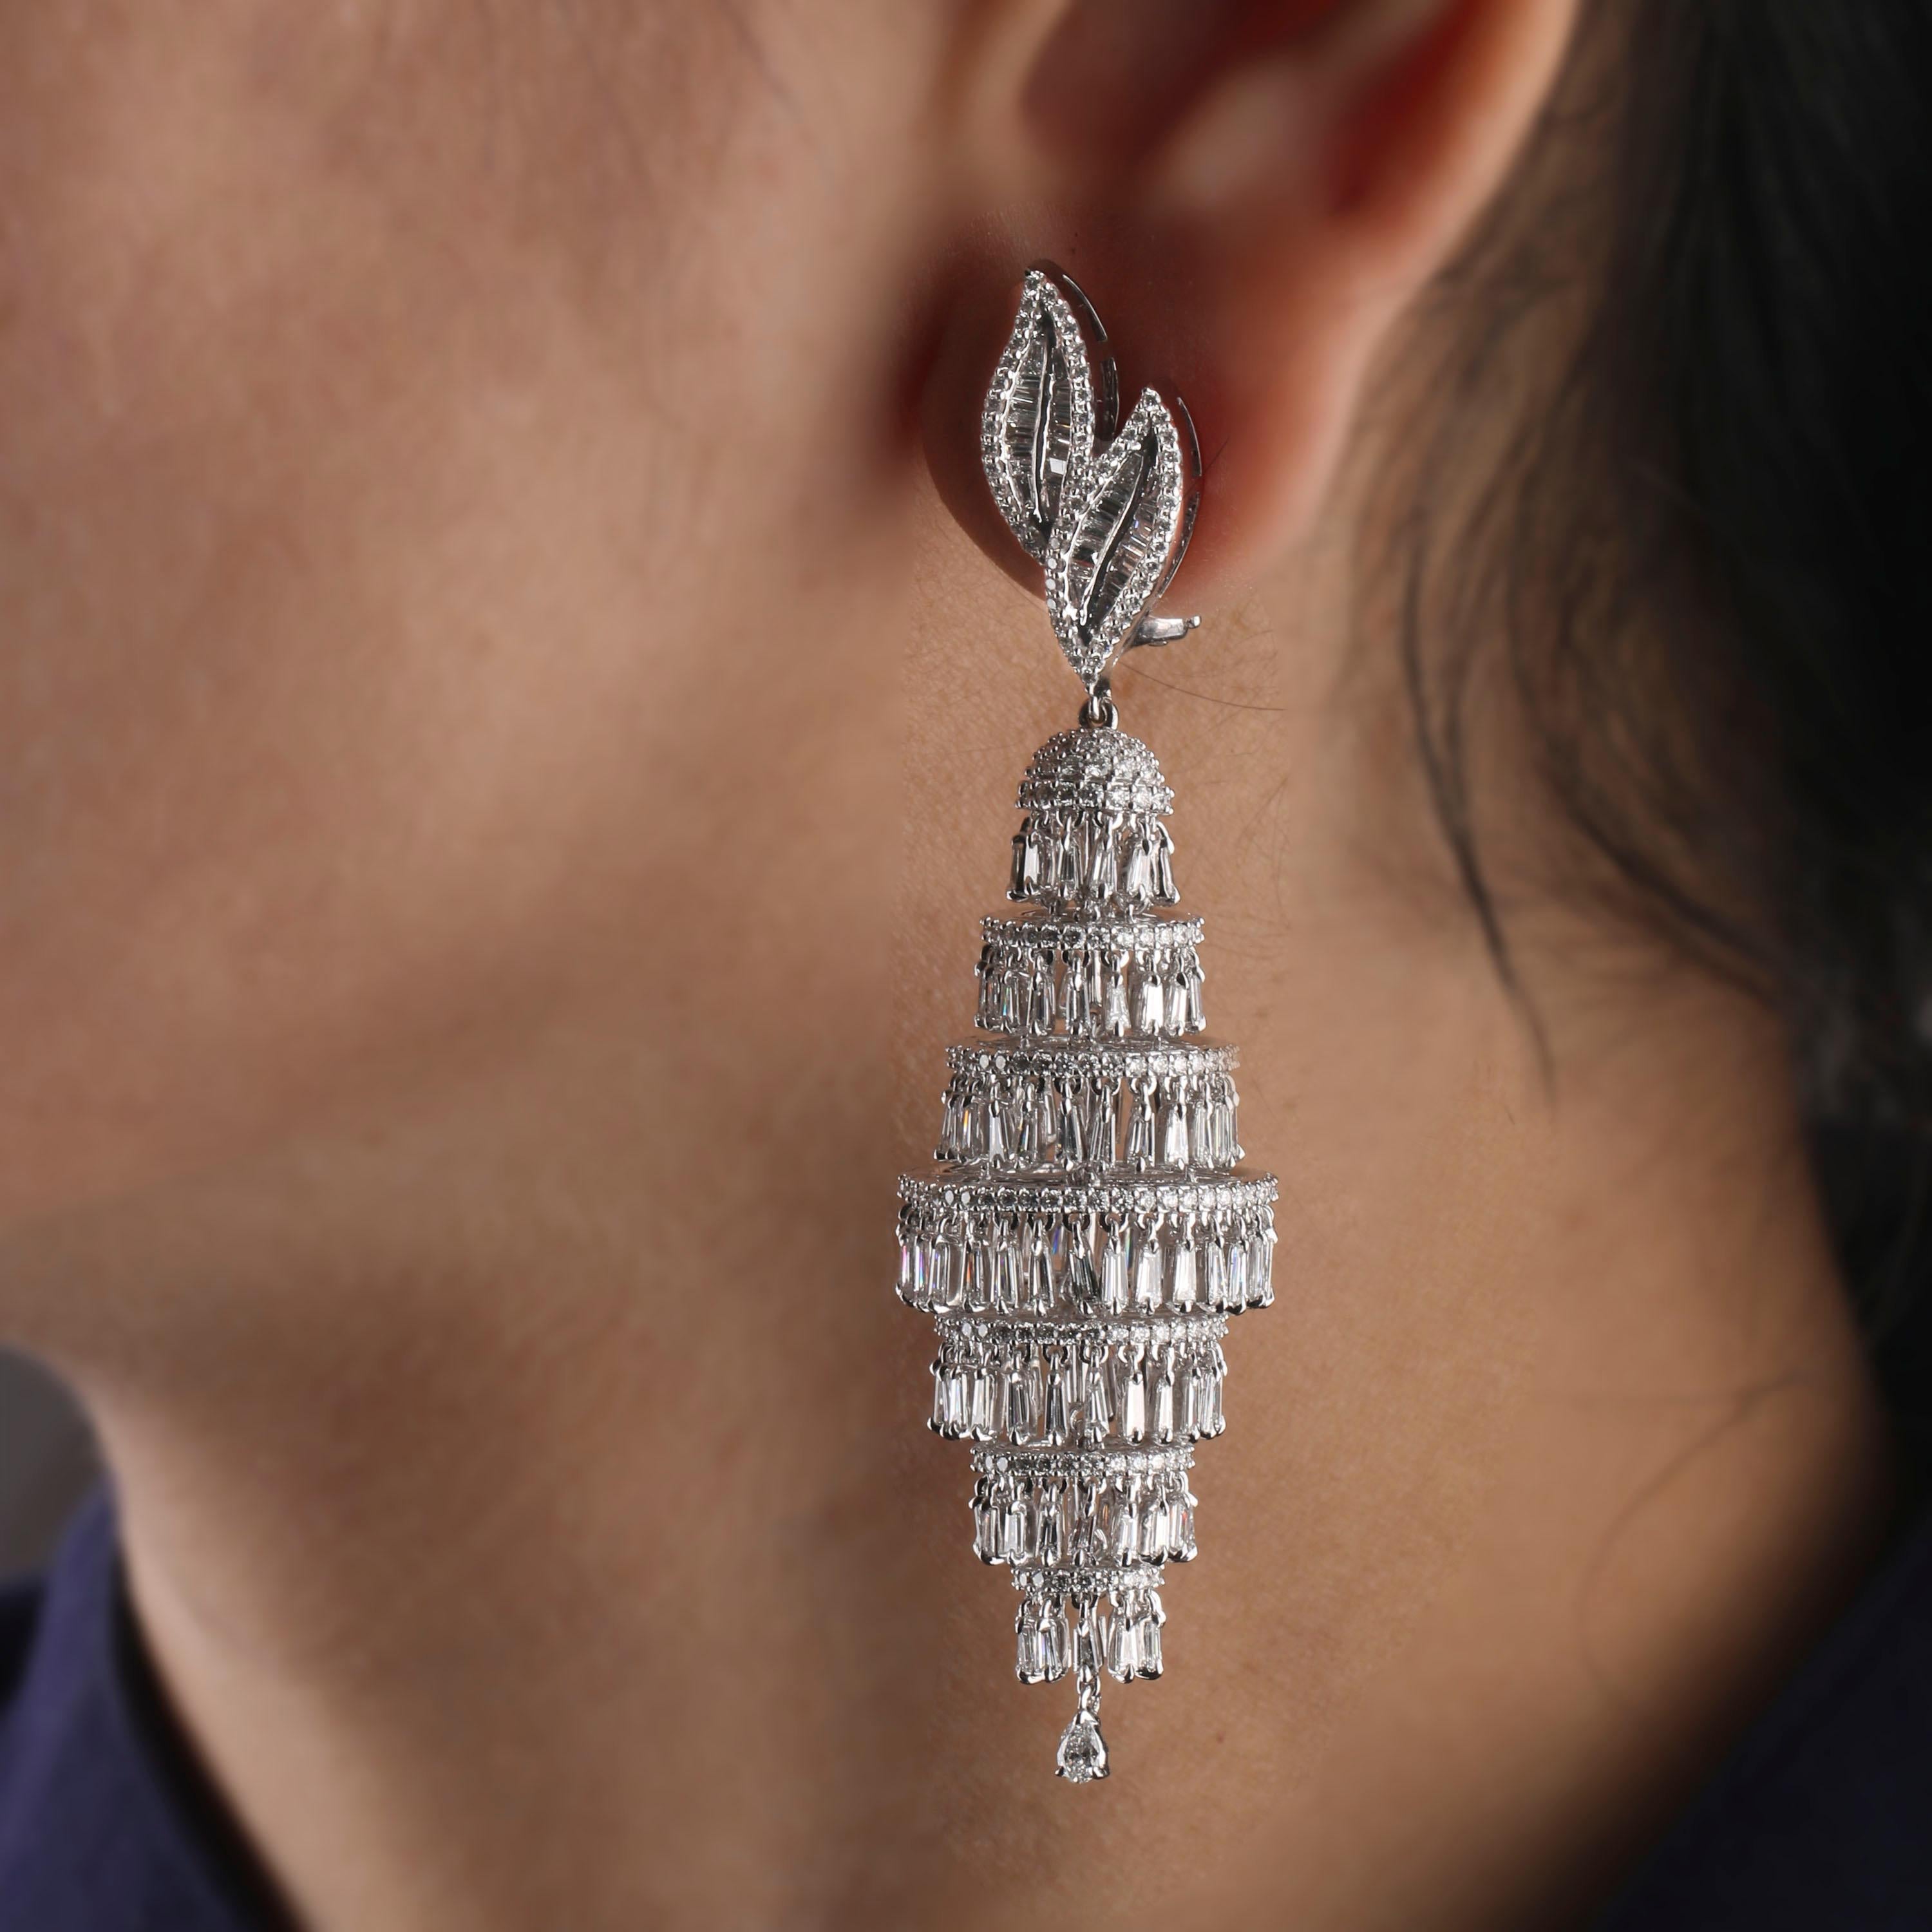 Gross Weight: 34.69 Grams
Diamond Weight: 7.98 cts
IGI Certification can be done on request

Video of the product can be shared upon request.

Set in 18 karat white gold, swinging from diamond studded leaves, these chandelier earrings are a diamond